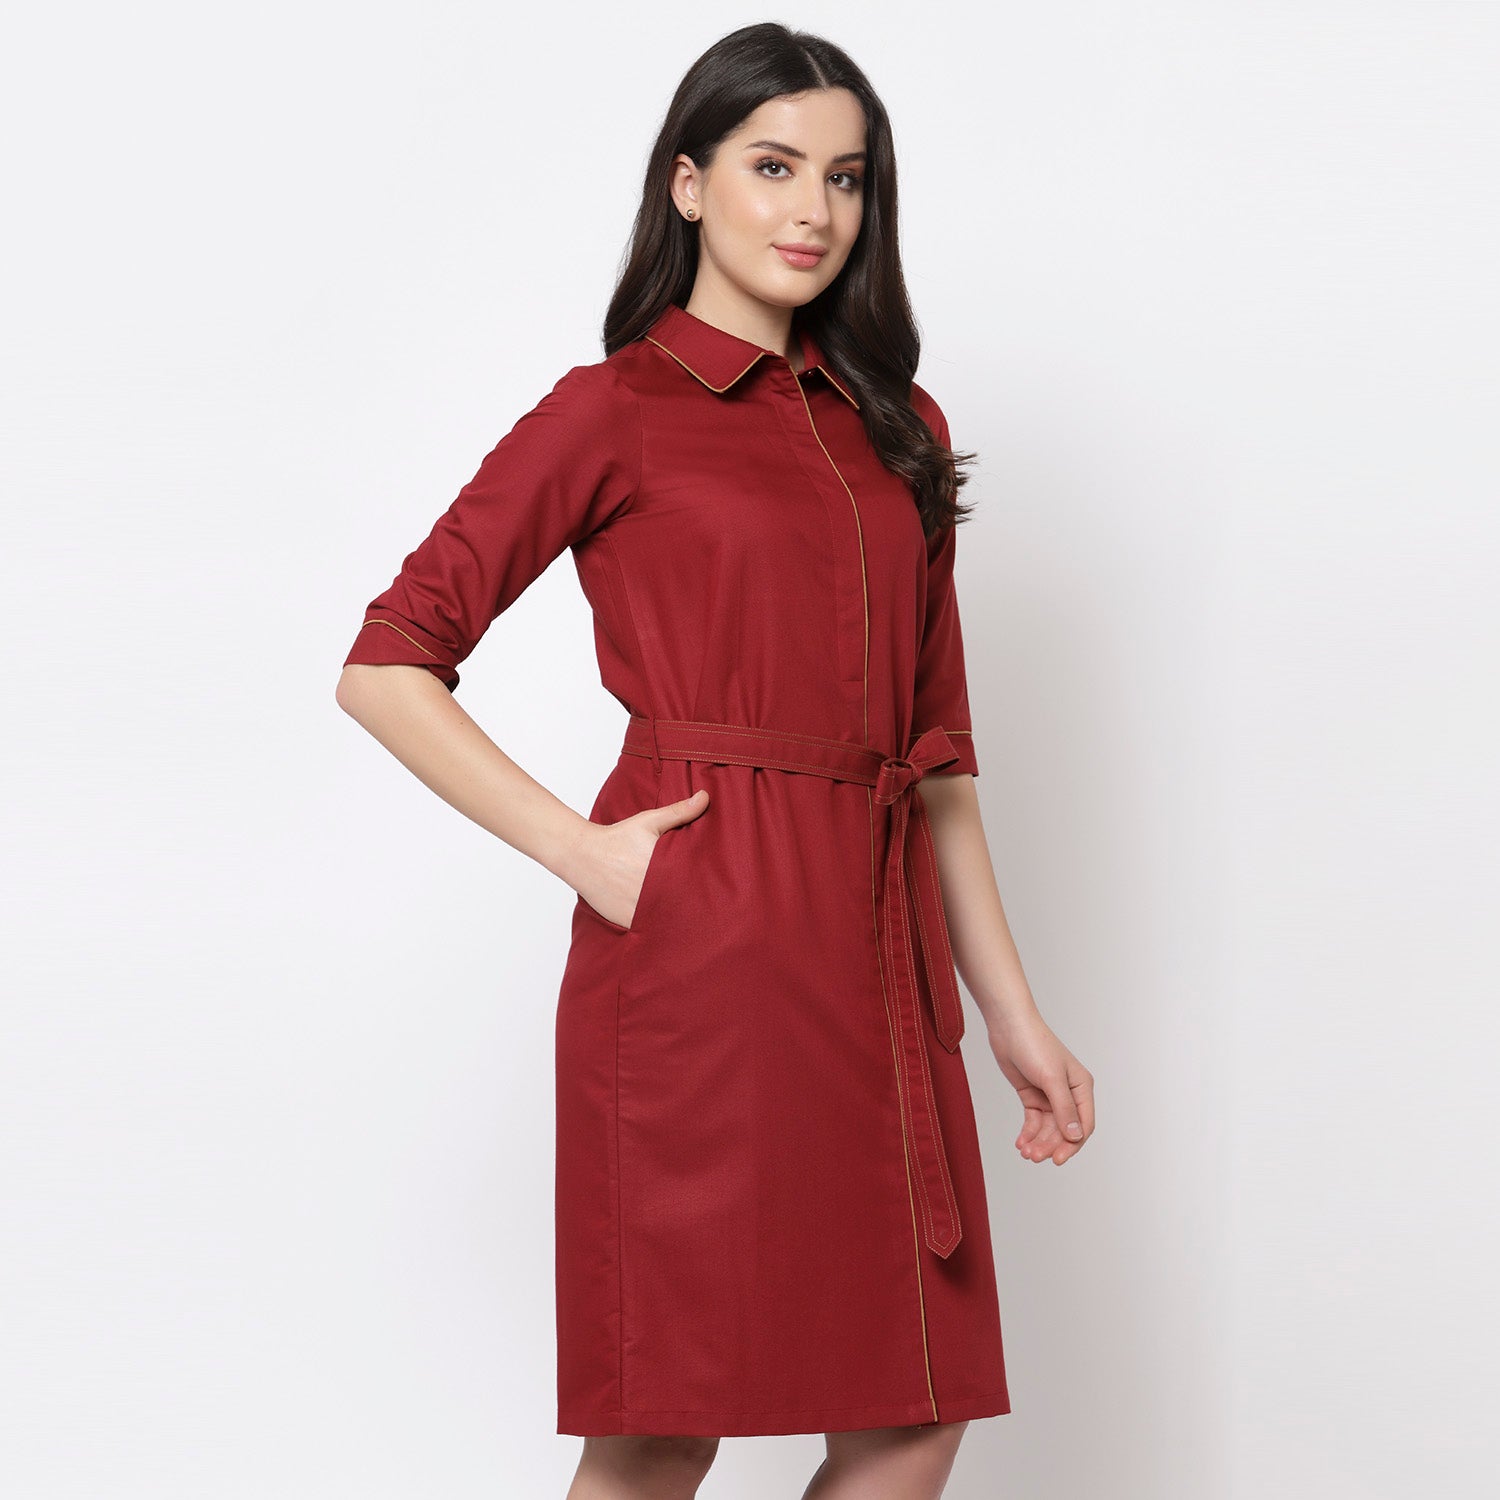 Red dress with belt and brown piping